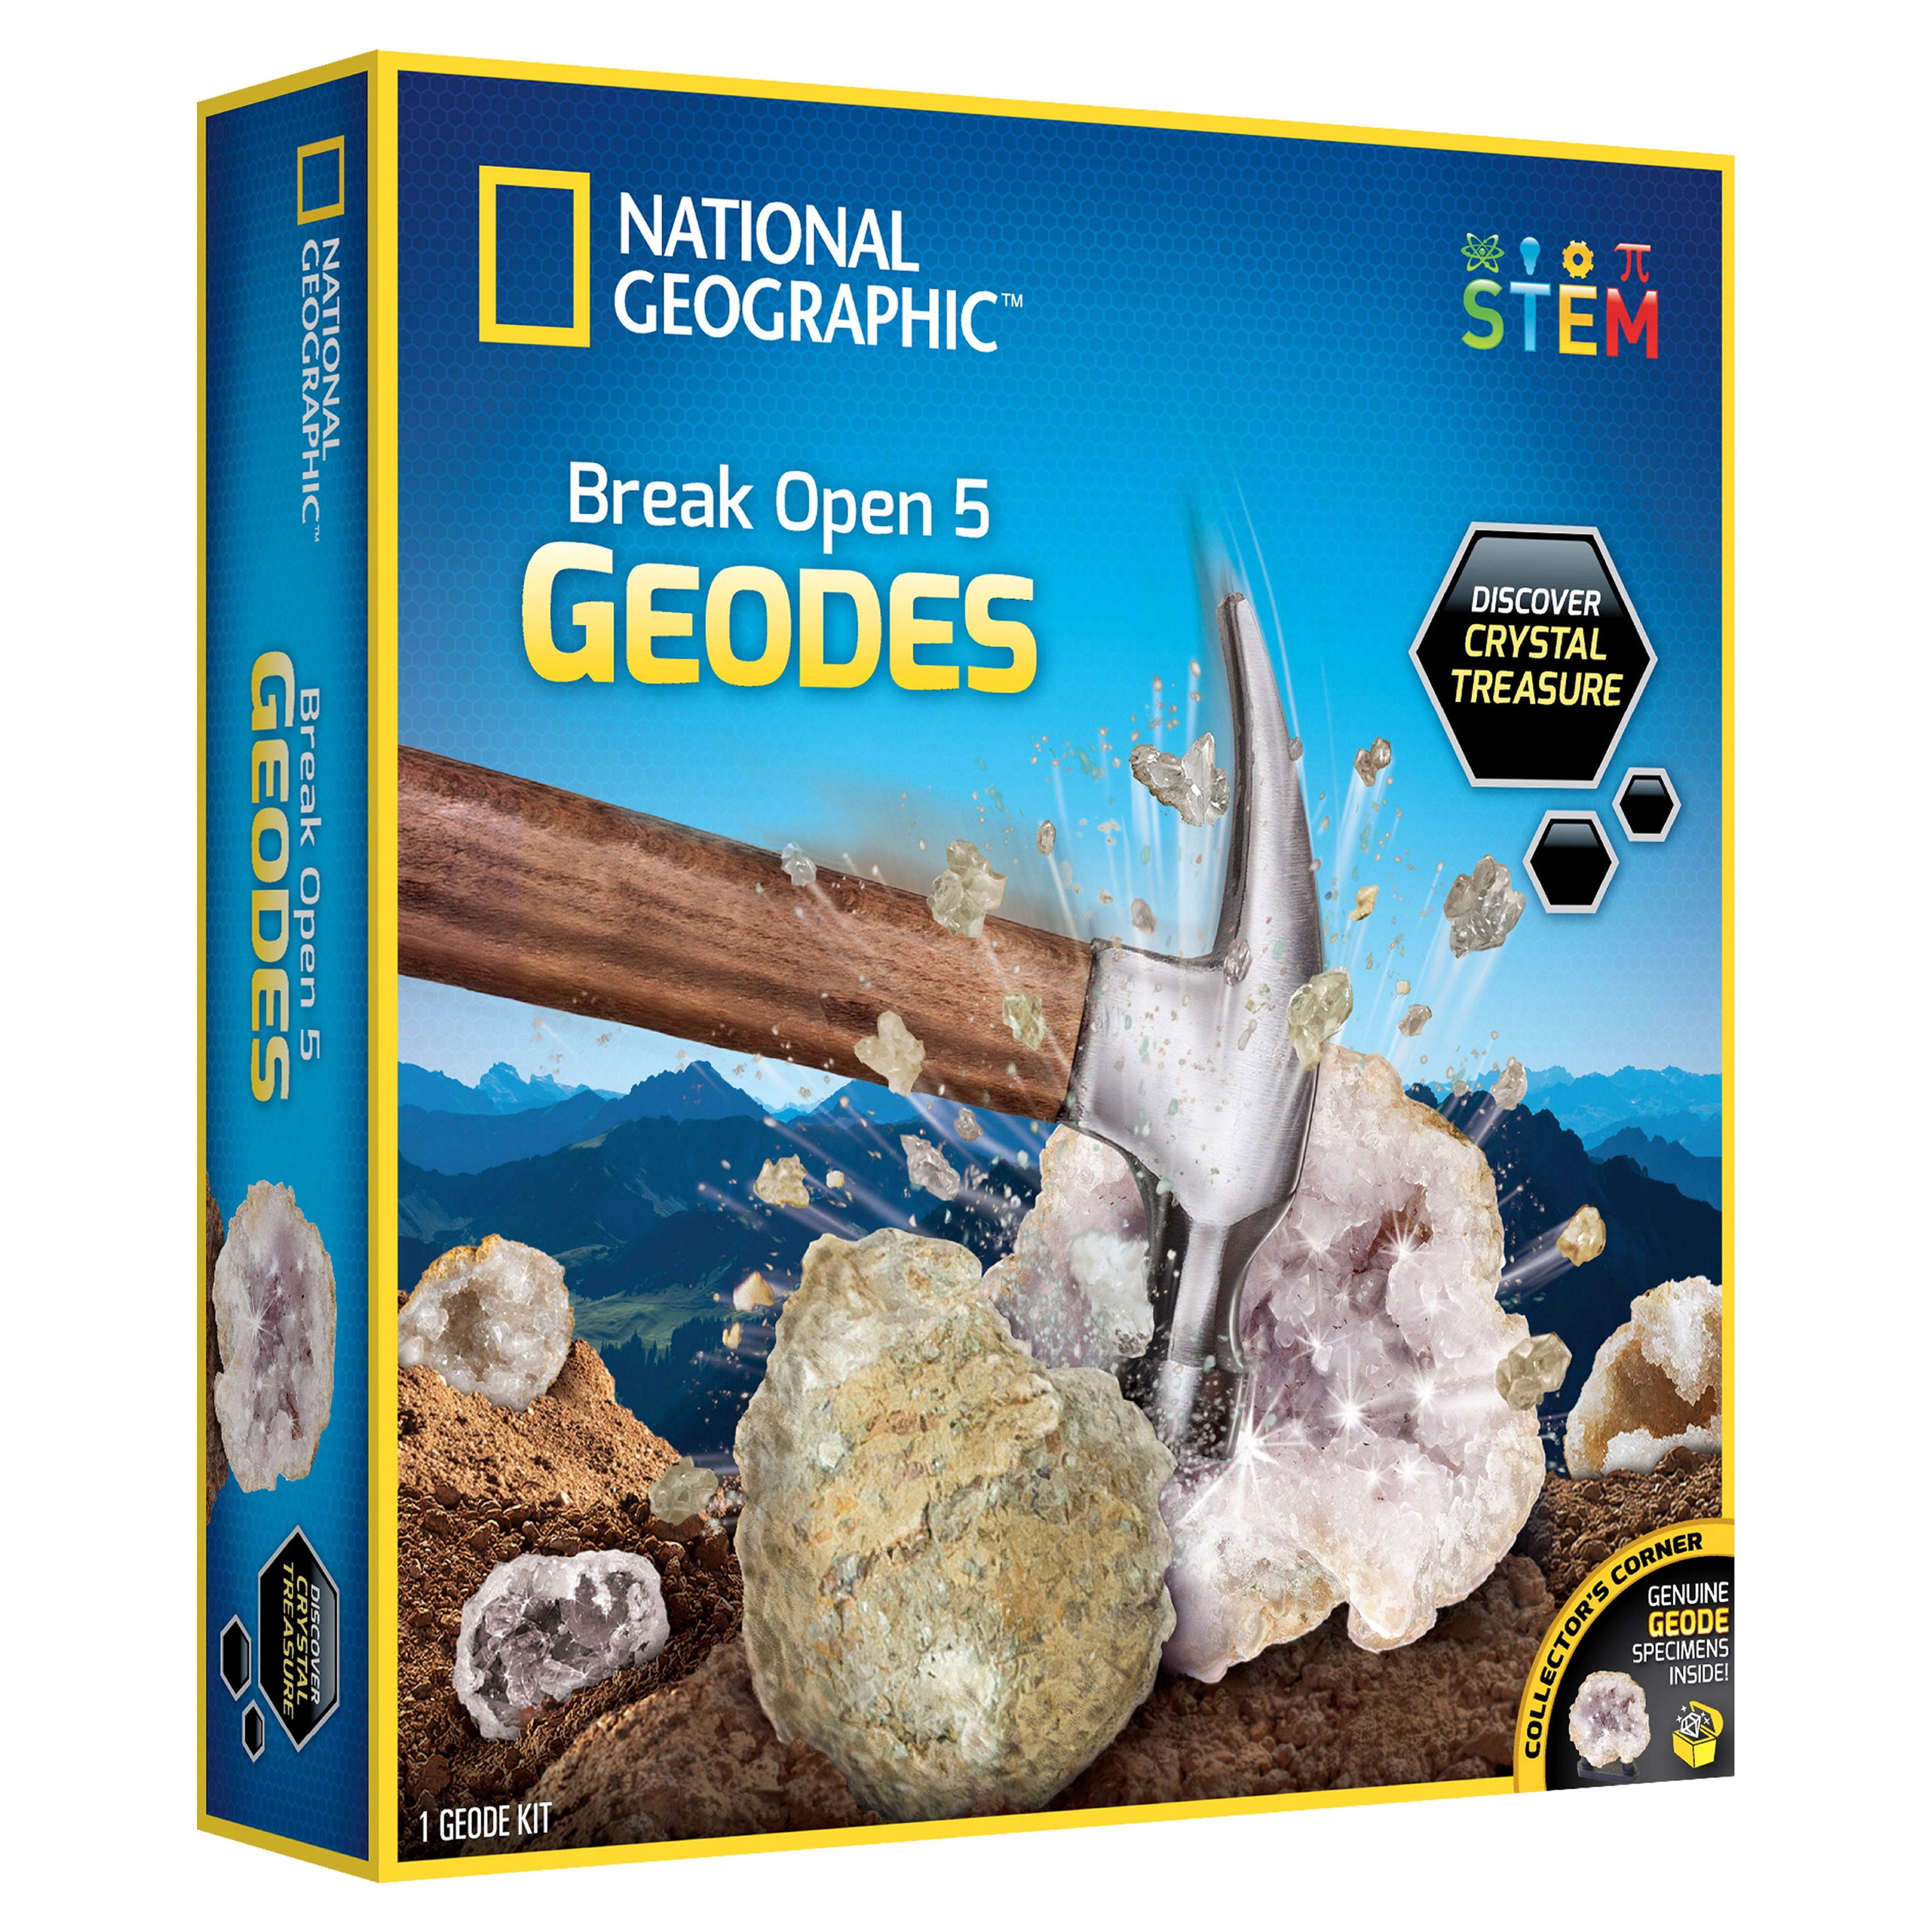 NATIONAL GEOGRAPHIC Earth Science Kit